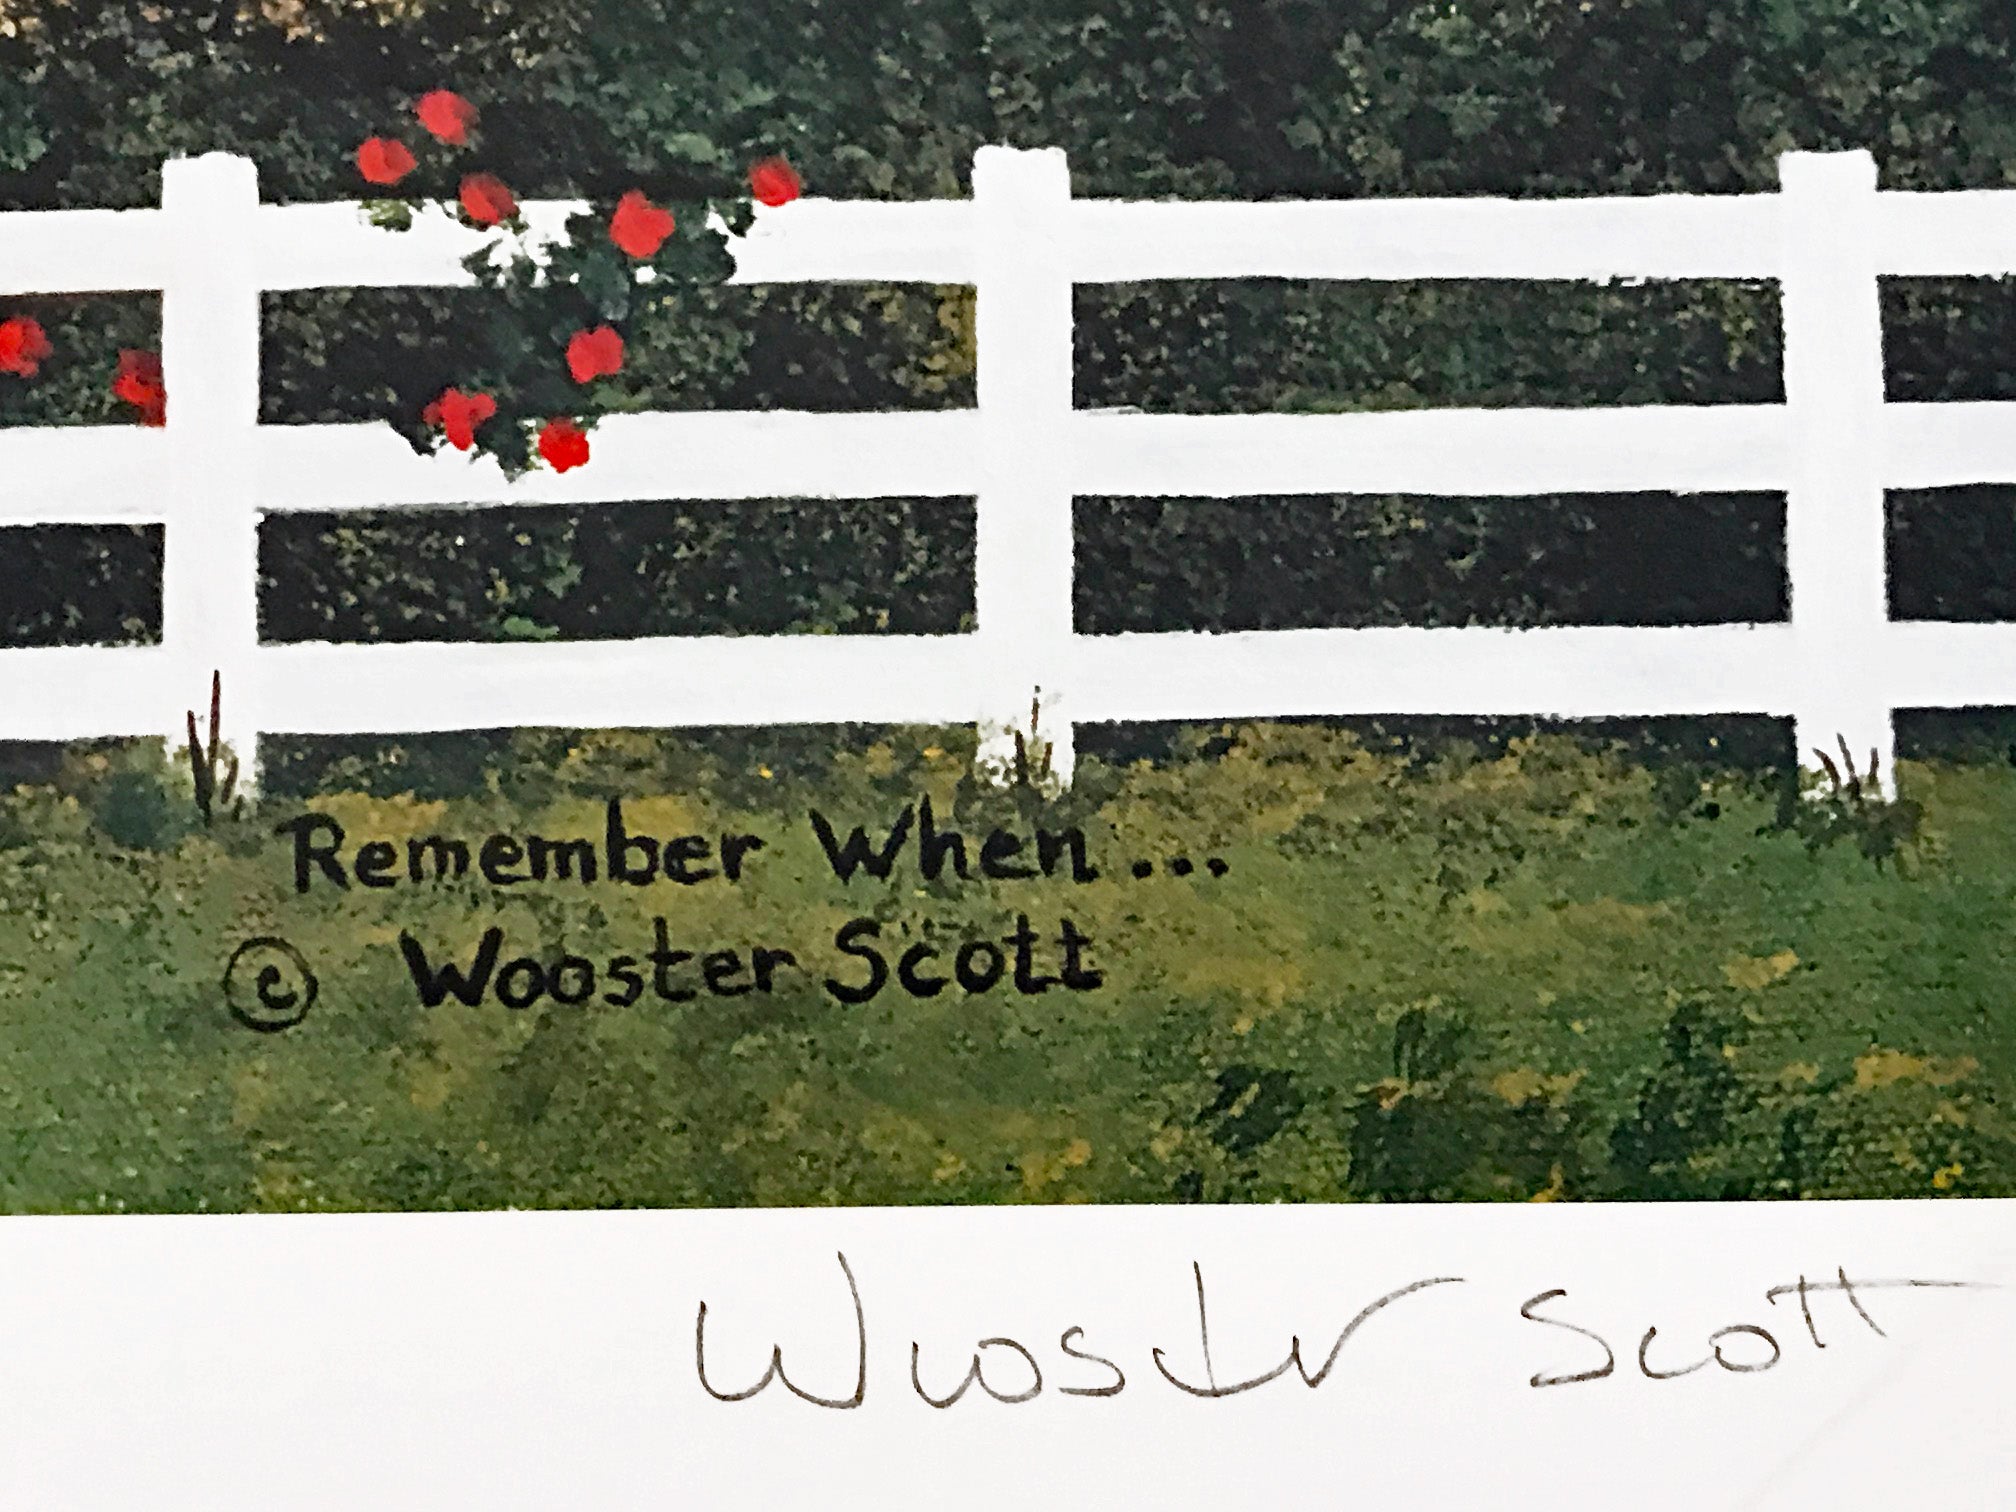 Remember When Jane Wooster Scott Offset Lithograph Print Artist Hand Signed and Numbered